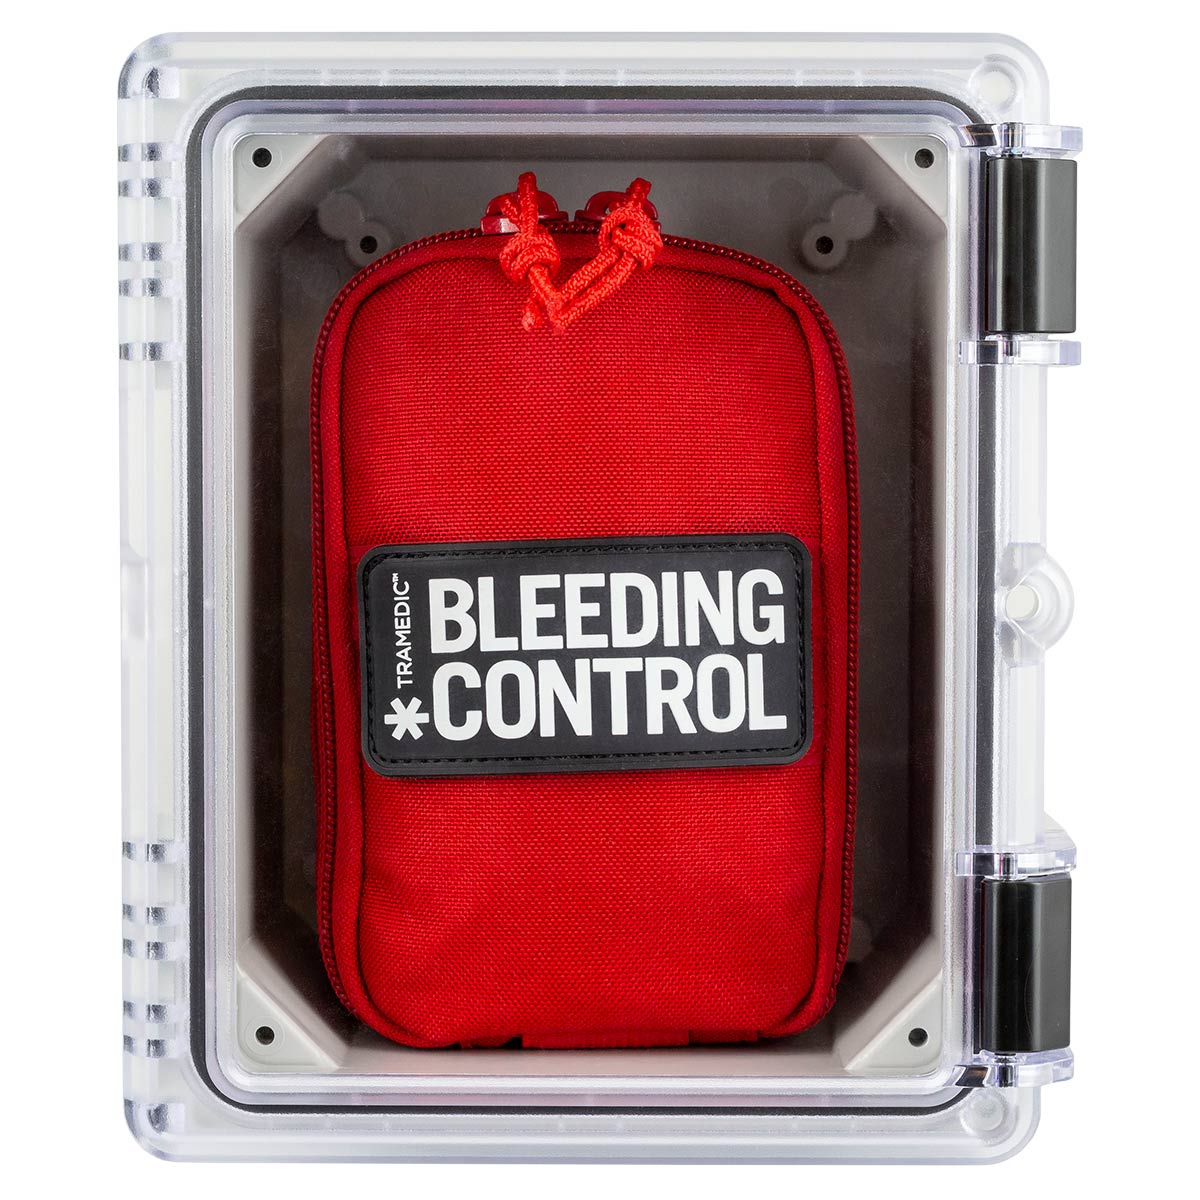 Cabinet for Bleeding Control Kits